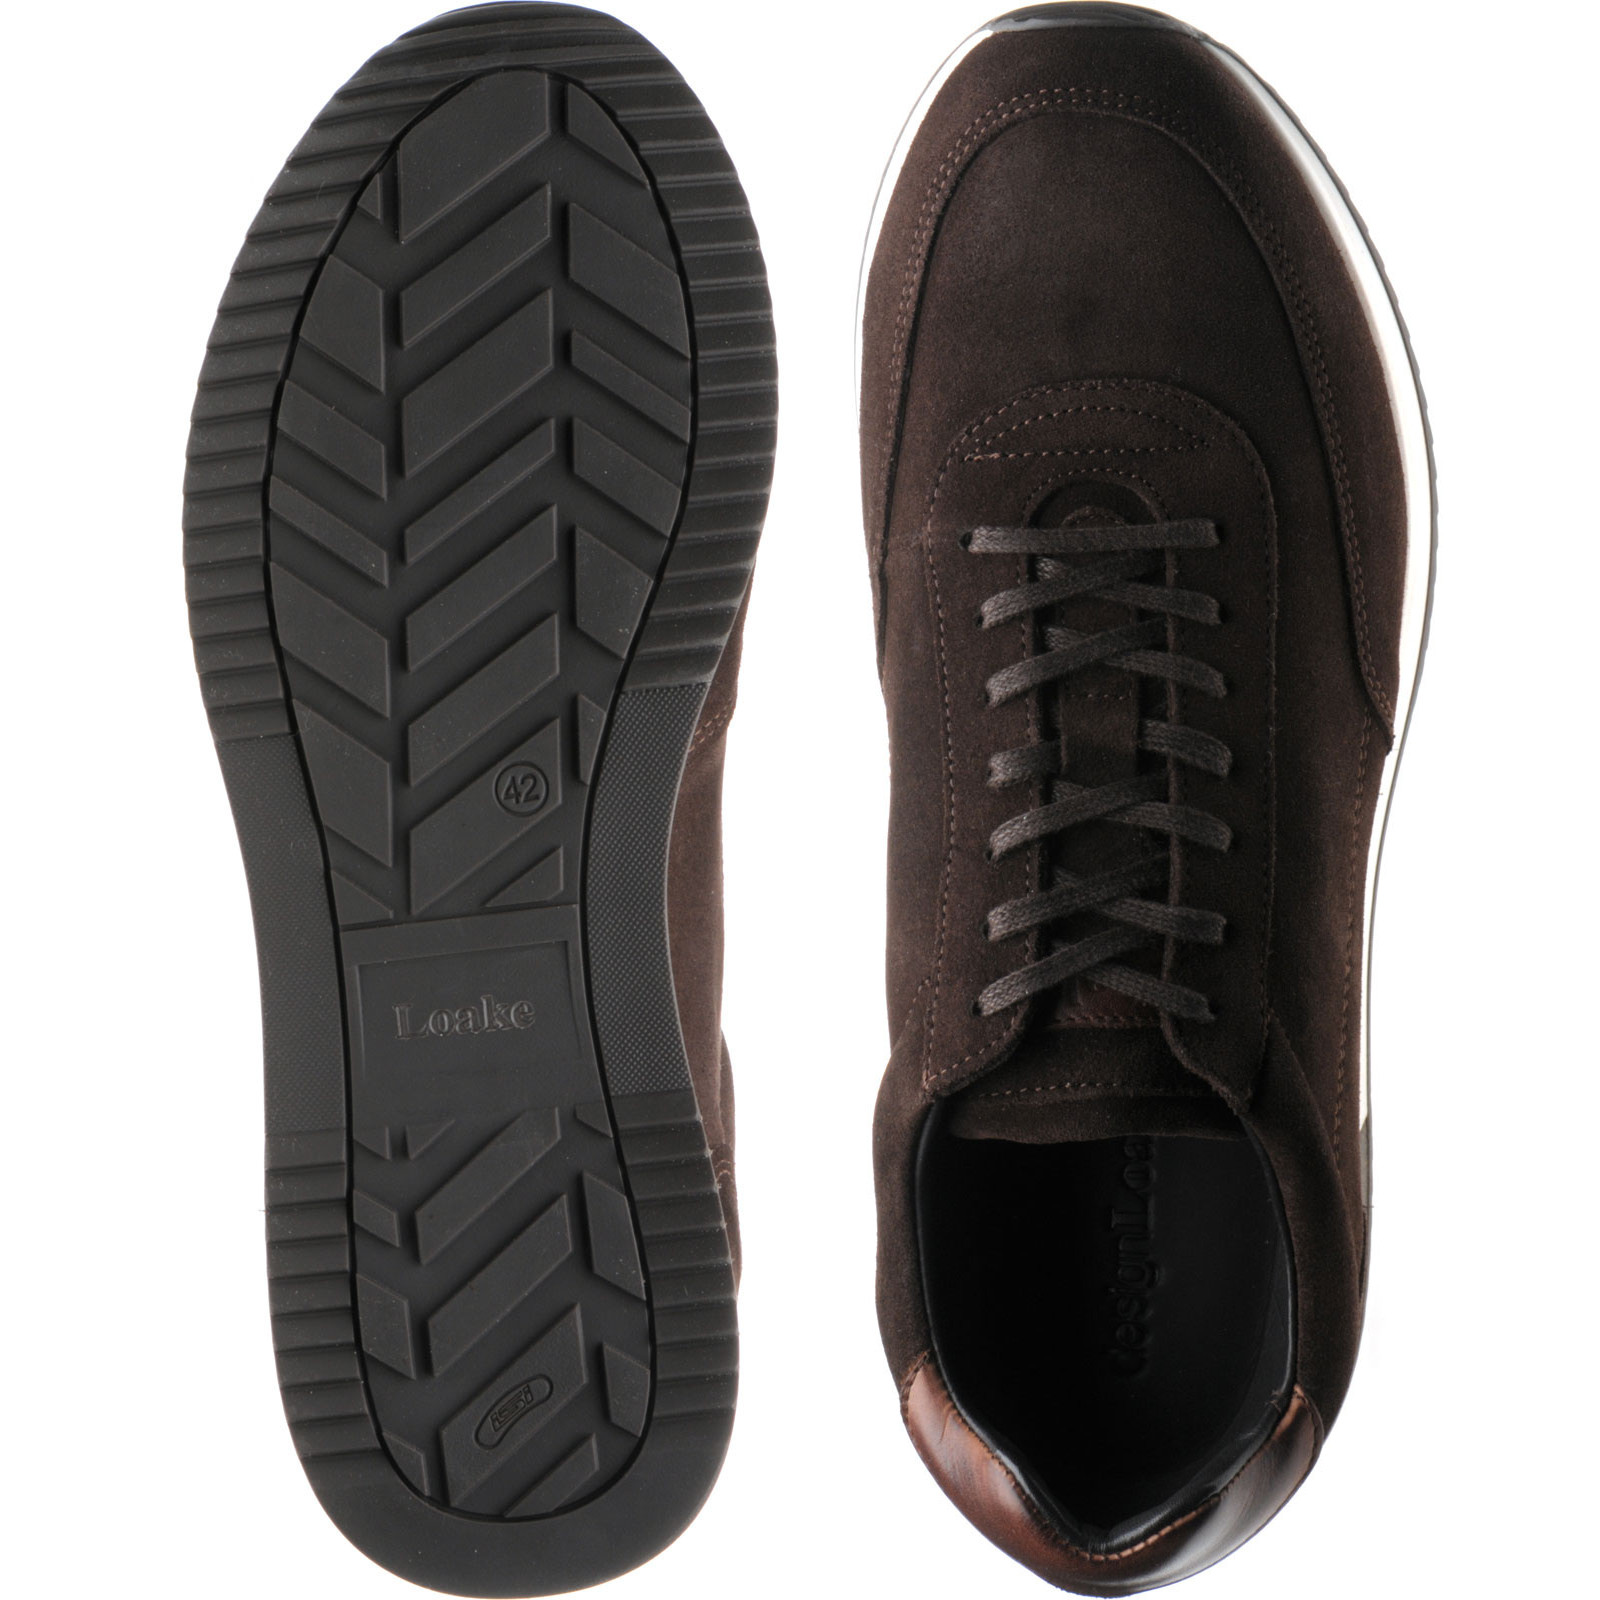 Loake shoes | Loake Lifestyle | Bannister in Choc Brown Suede at ...